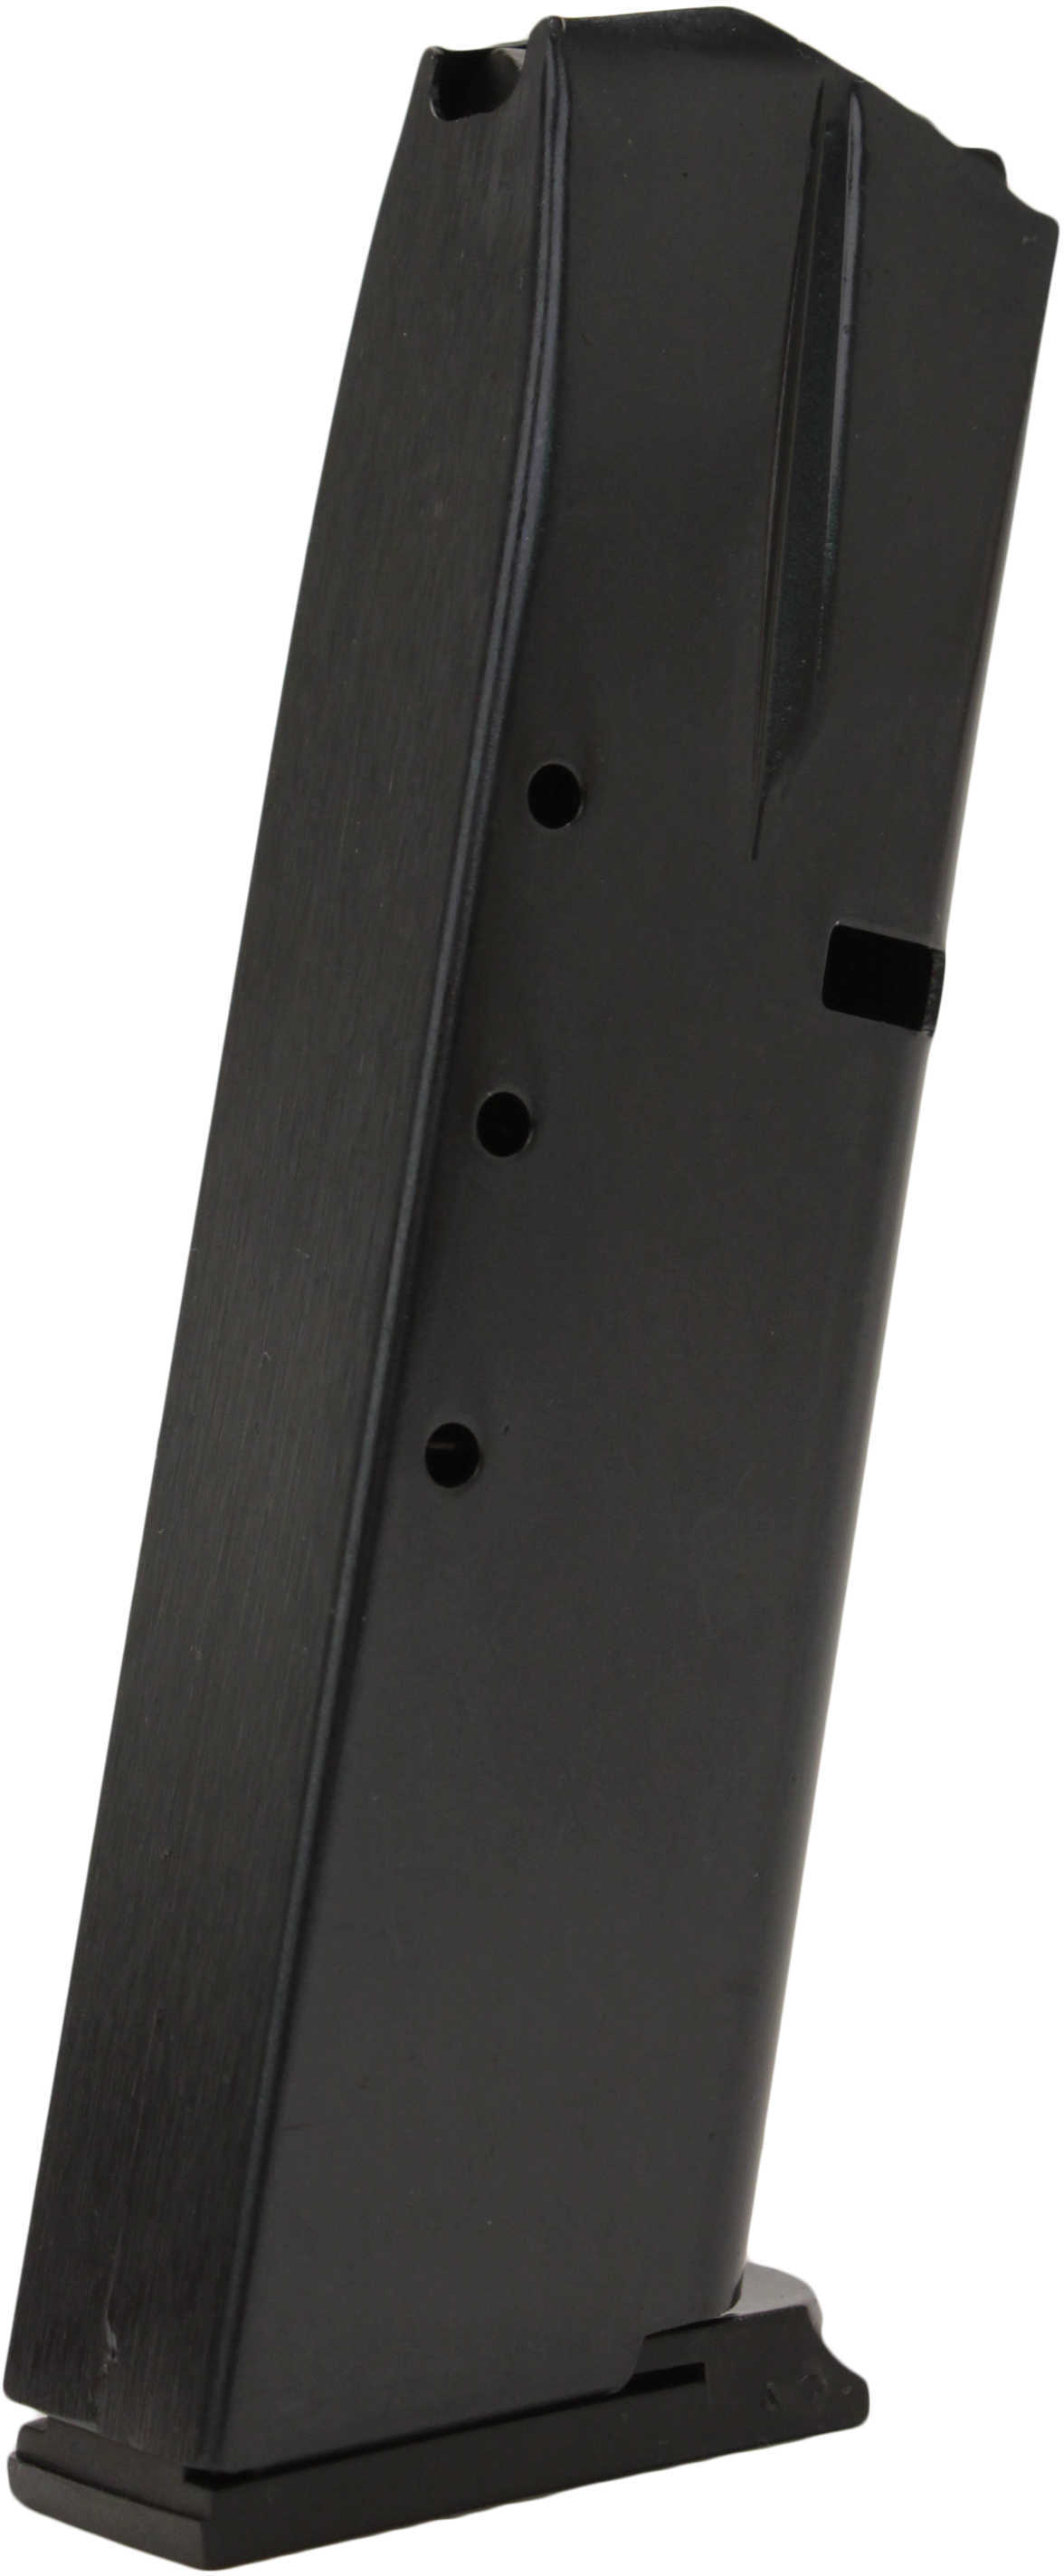 ProMag Smith & Wesson 910 915 459 5900 Series 9mm Magazine 15 Round Blued SMI-A1